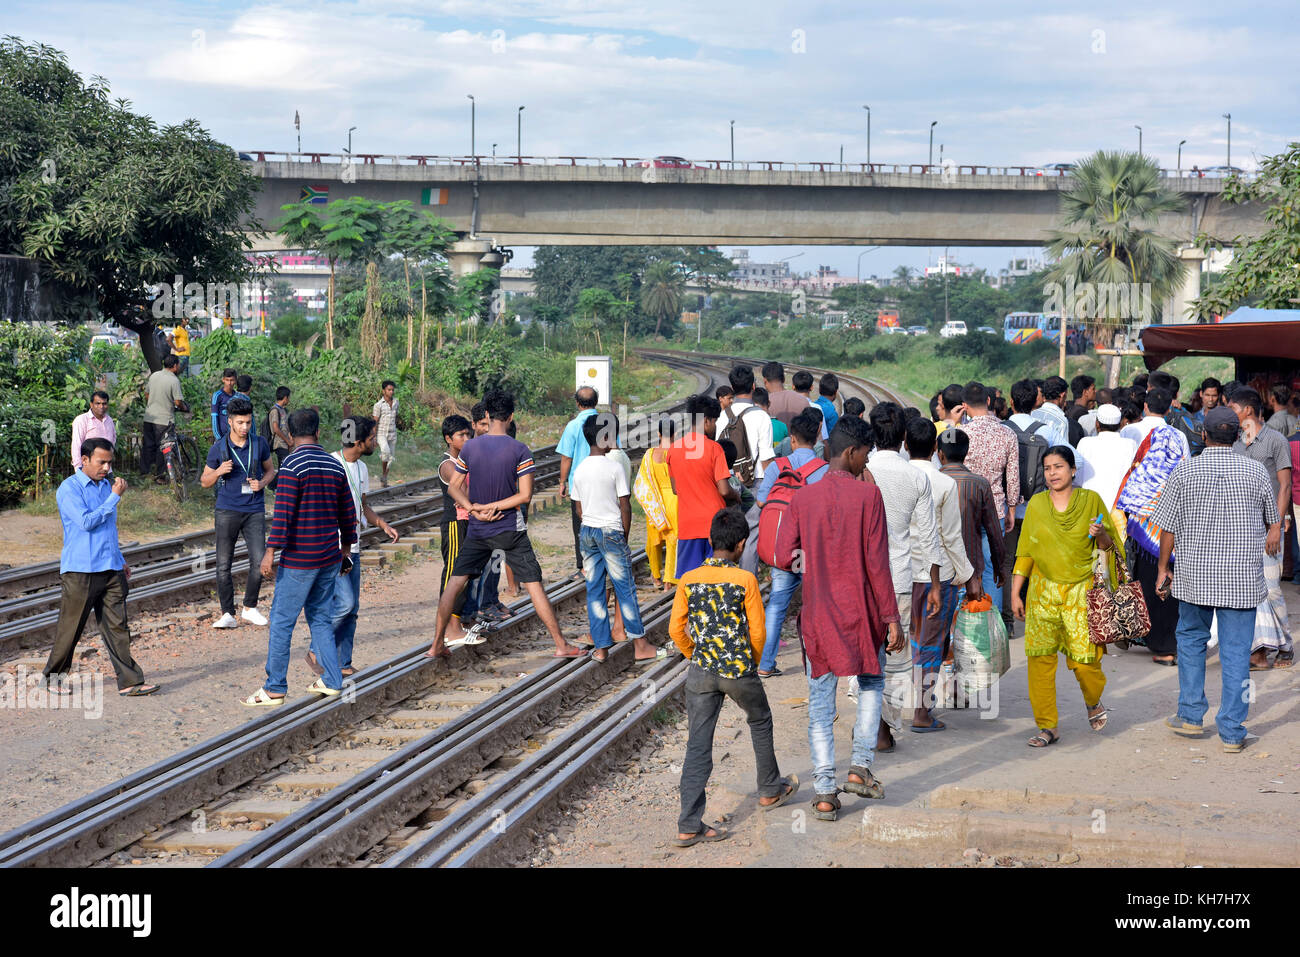 Dhaka, Bangladesh. 14th Nov, 2017. Crowded gather on the spot where a man died due to hit by a train at a level crossing in Dhaka, Bangladesh. The authorities have taken numerous steps to raise awareness about crossing streets and railway level crossings safely in Dhaka, but pedestrians continue to violate rules and put their lives at risk. Credit: SK Hasan Ali/Alamy Live News Stock Photo